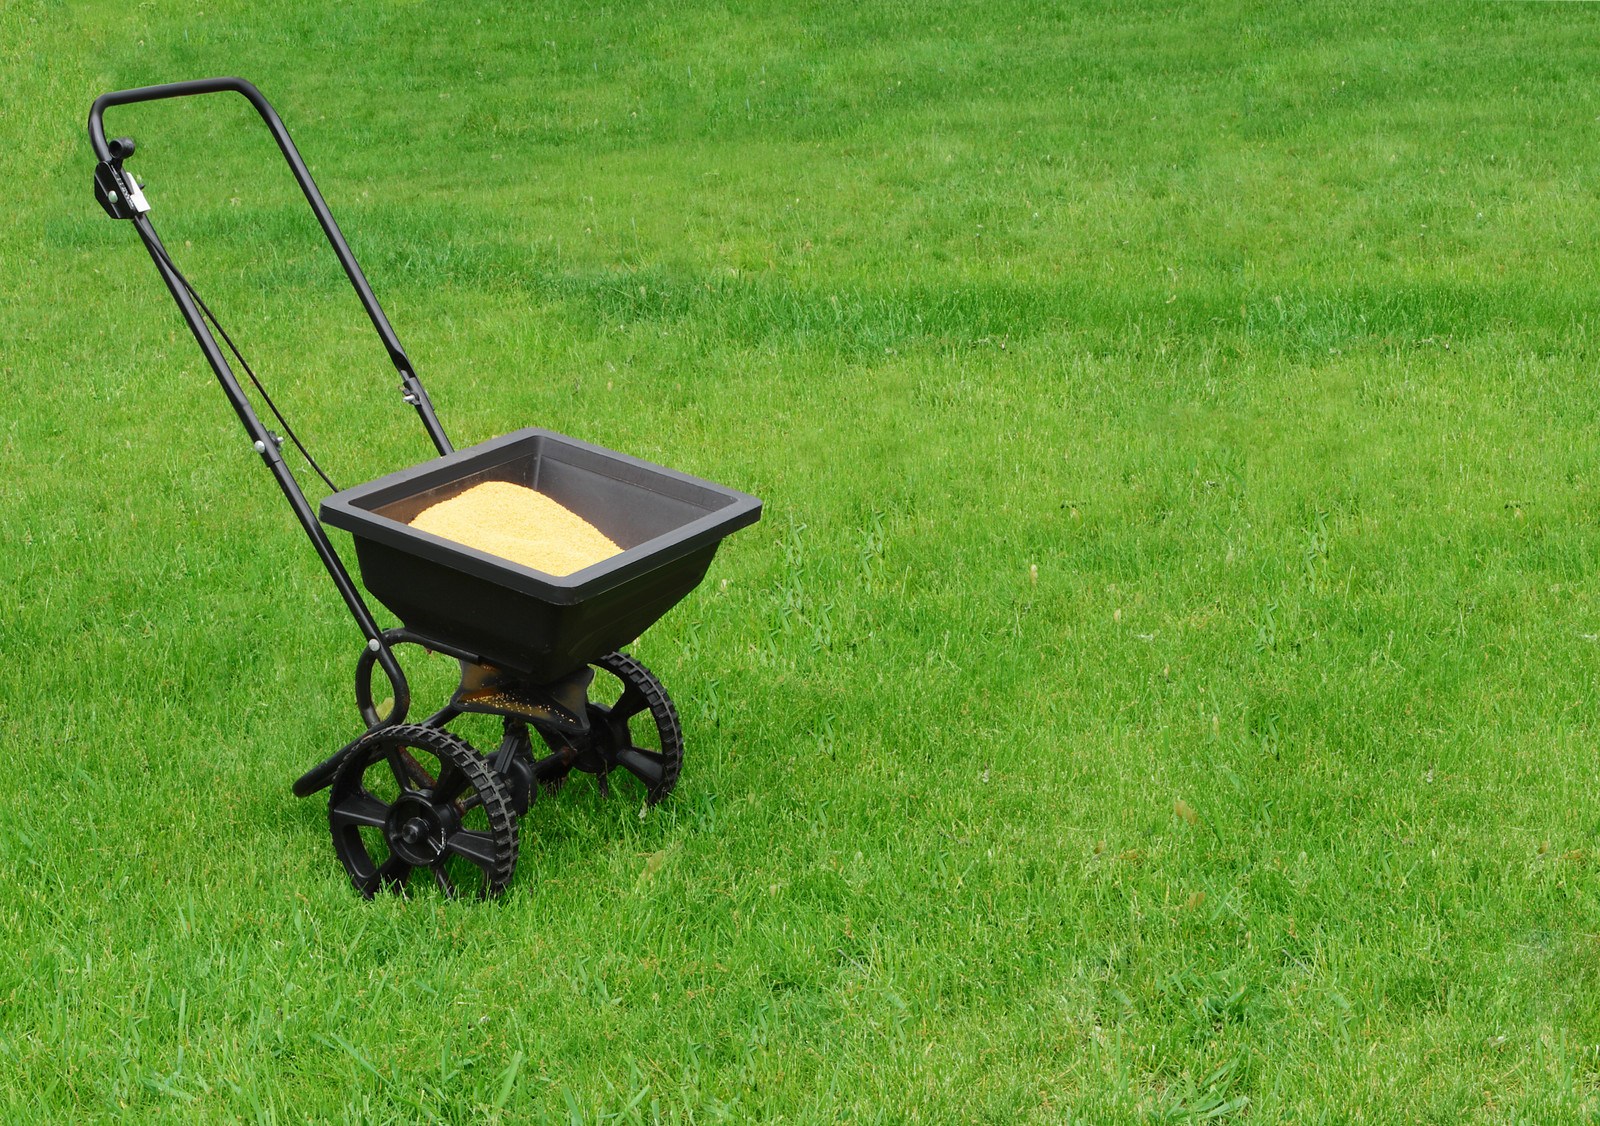 Amarillo Lawn Care for this Summer